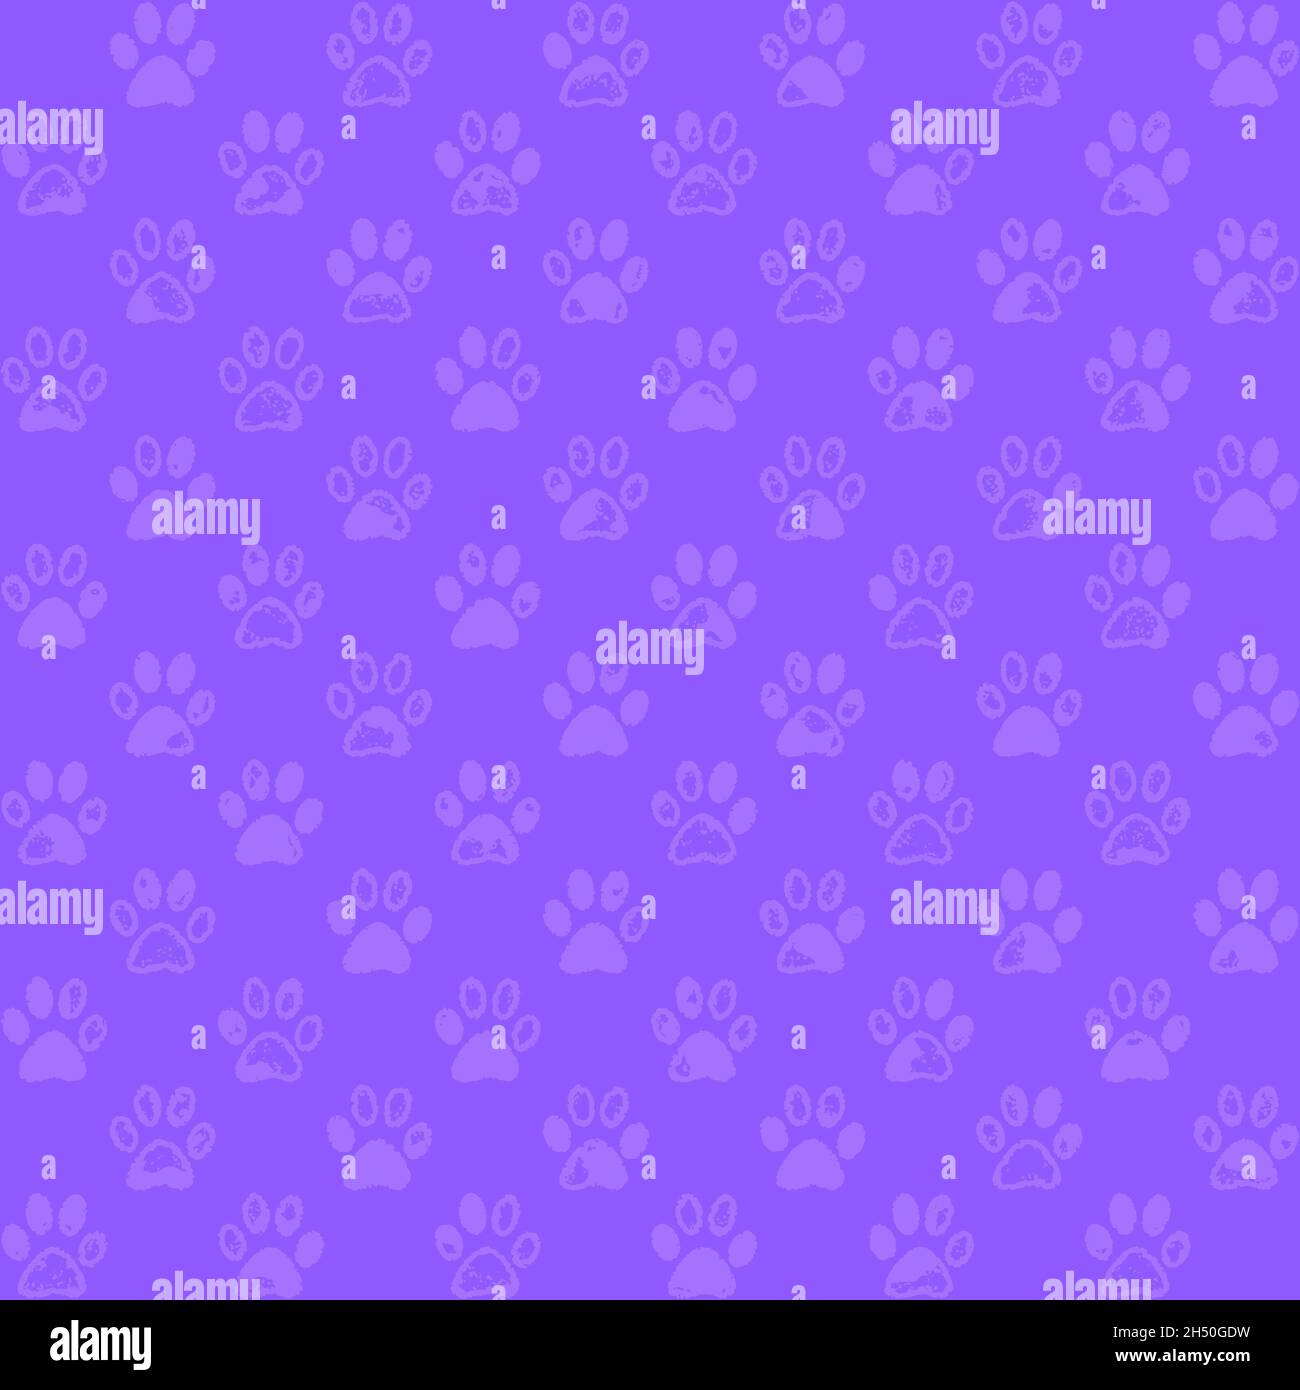 Paw prints in shades of lilac, light on darker background, a seamless pattern Stock Photo